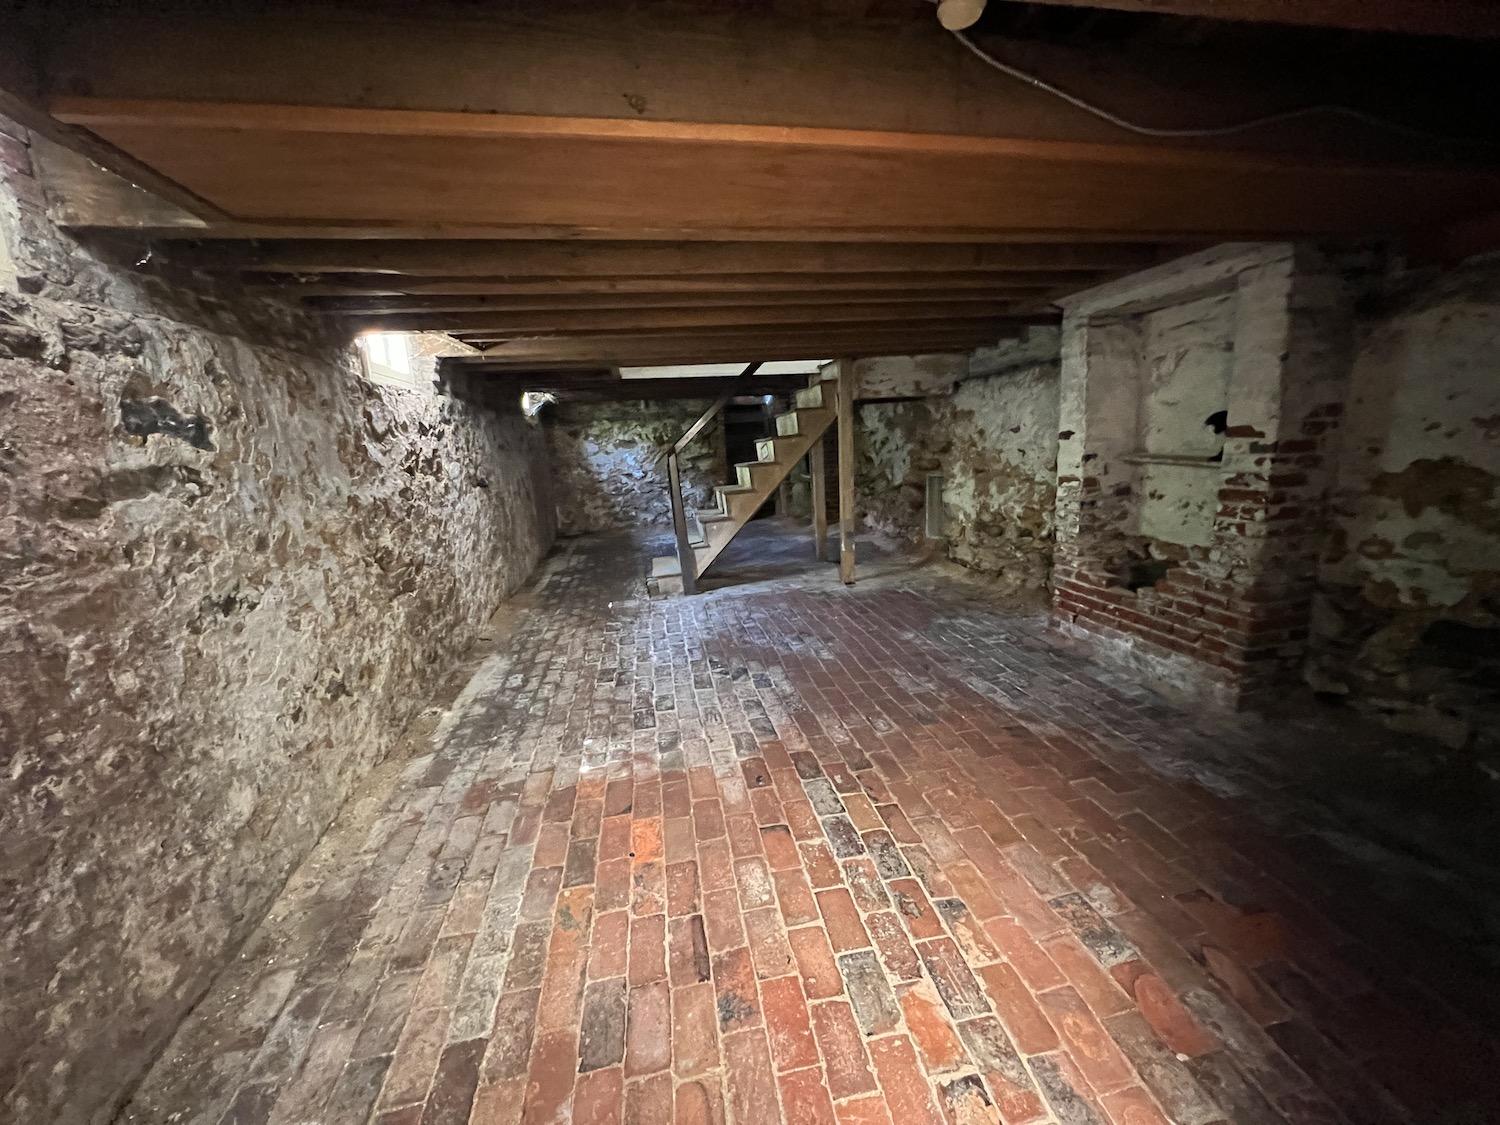 The cellar at Edgar Allan Poe's former house is empty except for cobwebs.